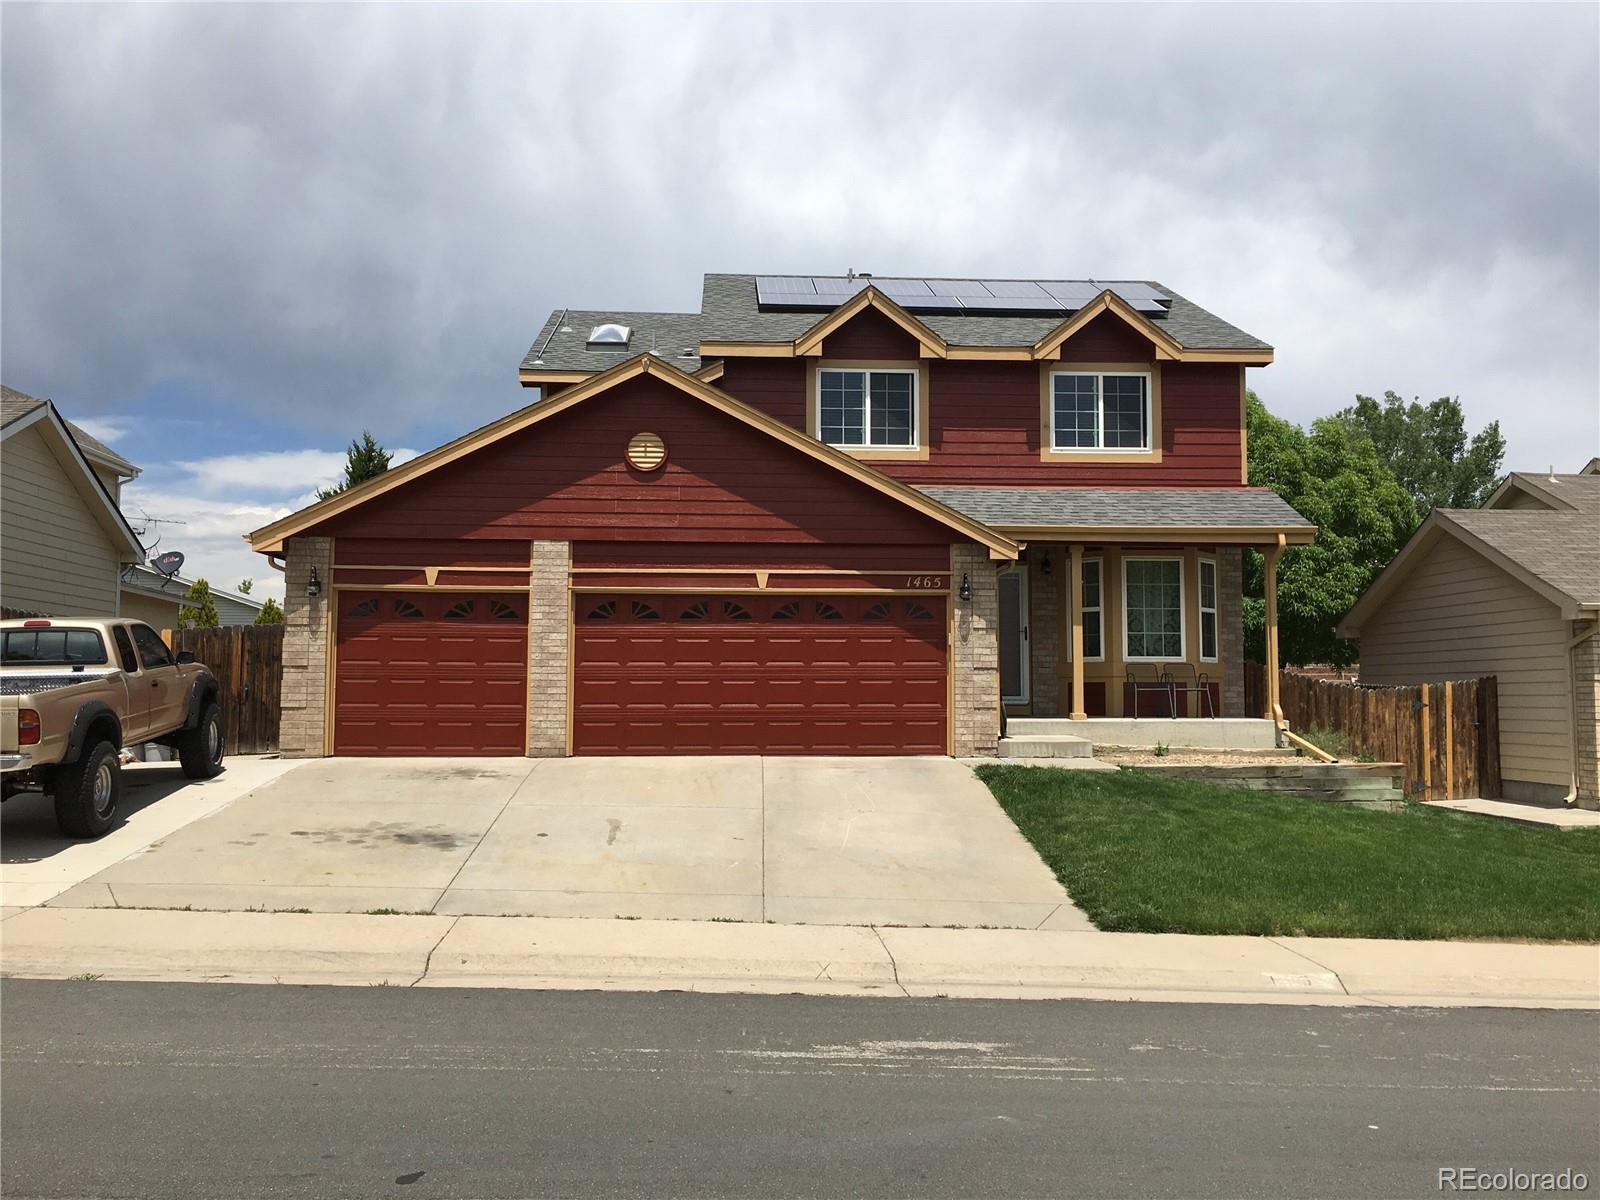 1465 E 96th Place, thornton MLS: 2174284 Beds: 4 Baths: 3 Price: $545,900